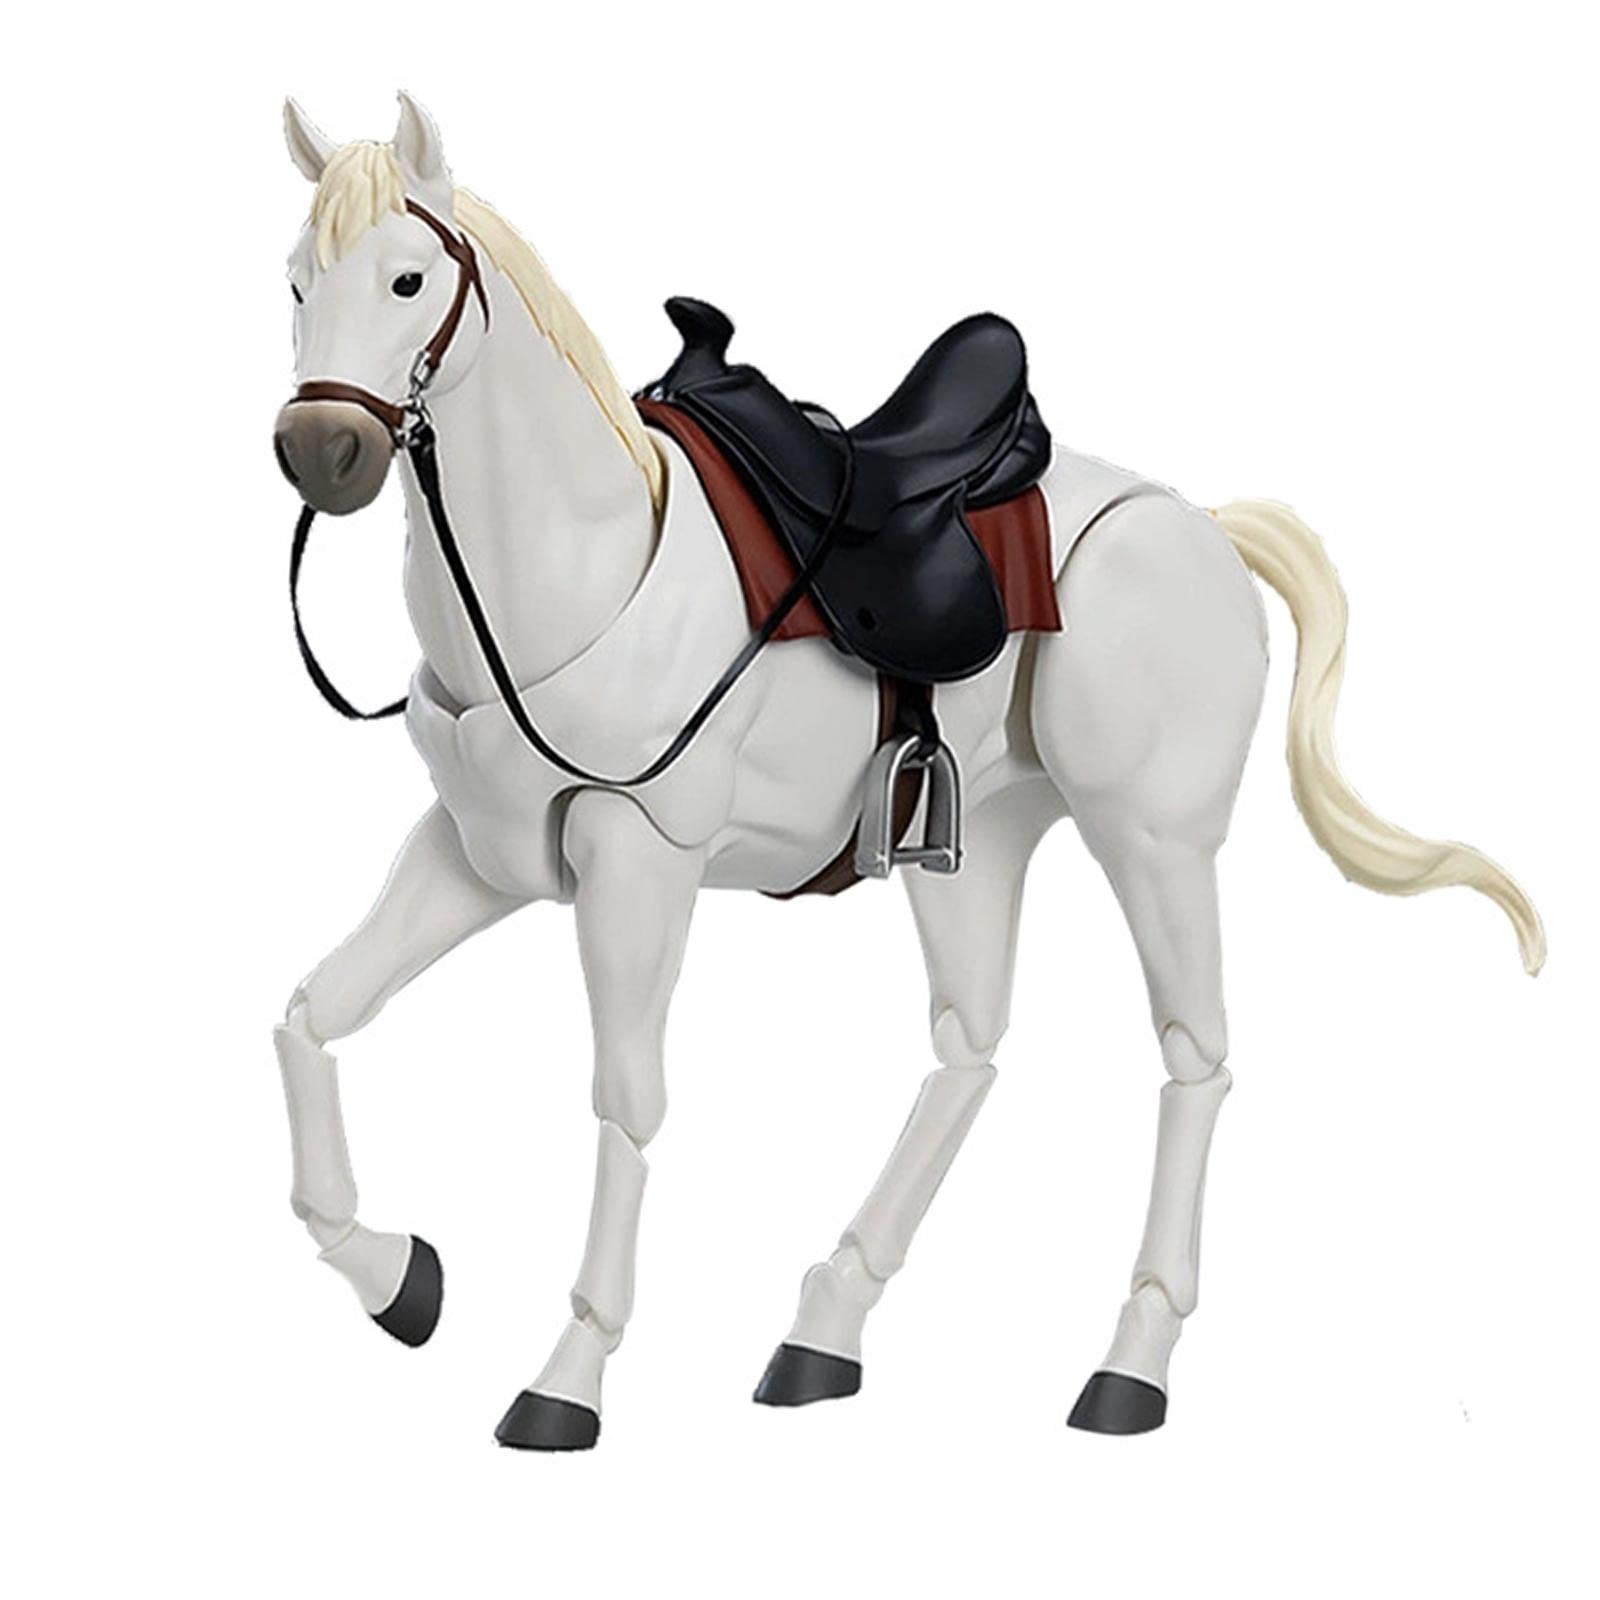 UGPLM 1/12 Scale Action Figures 1/12 Scale Horse Figure Model Collection Home Decor Simulation Realistic Painted Figures 1:12 Scale Animal Figurine, White, 22cm